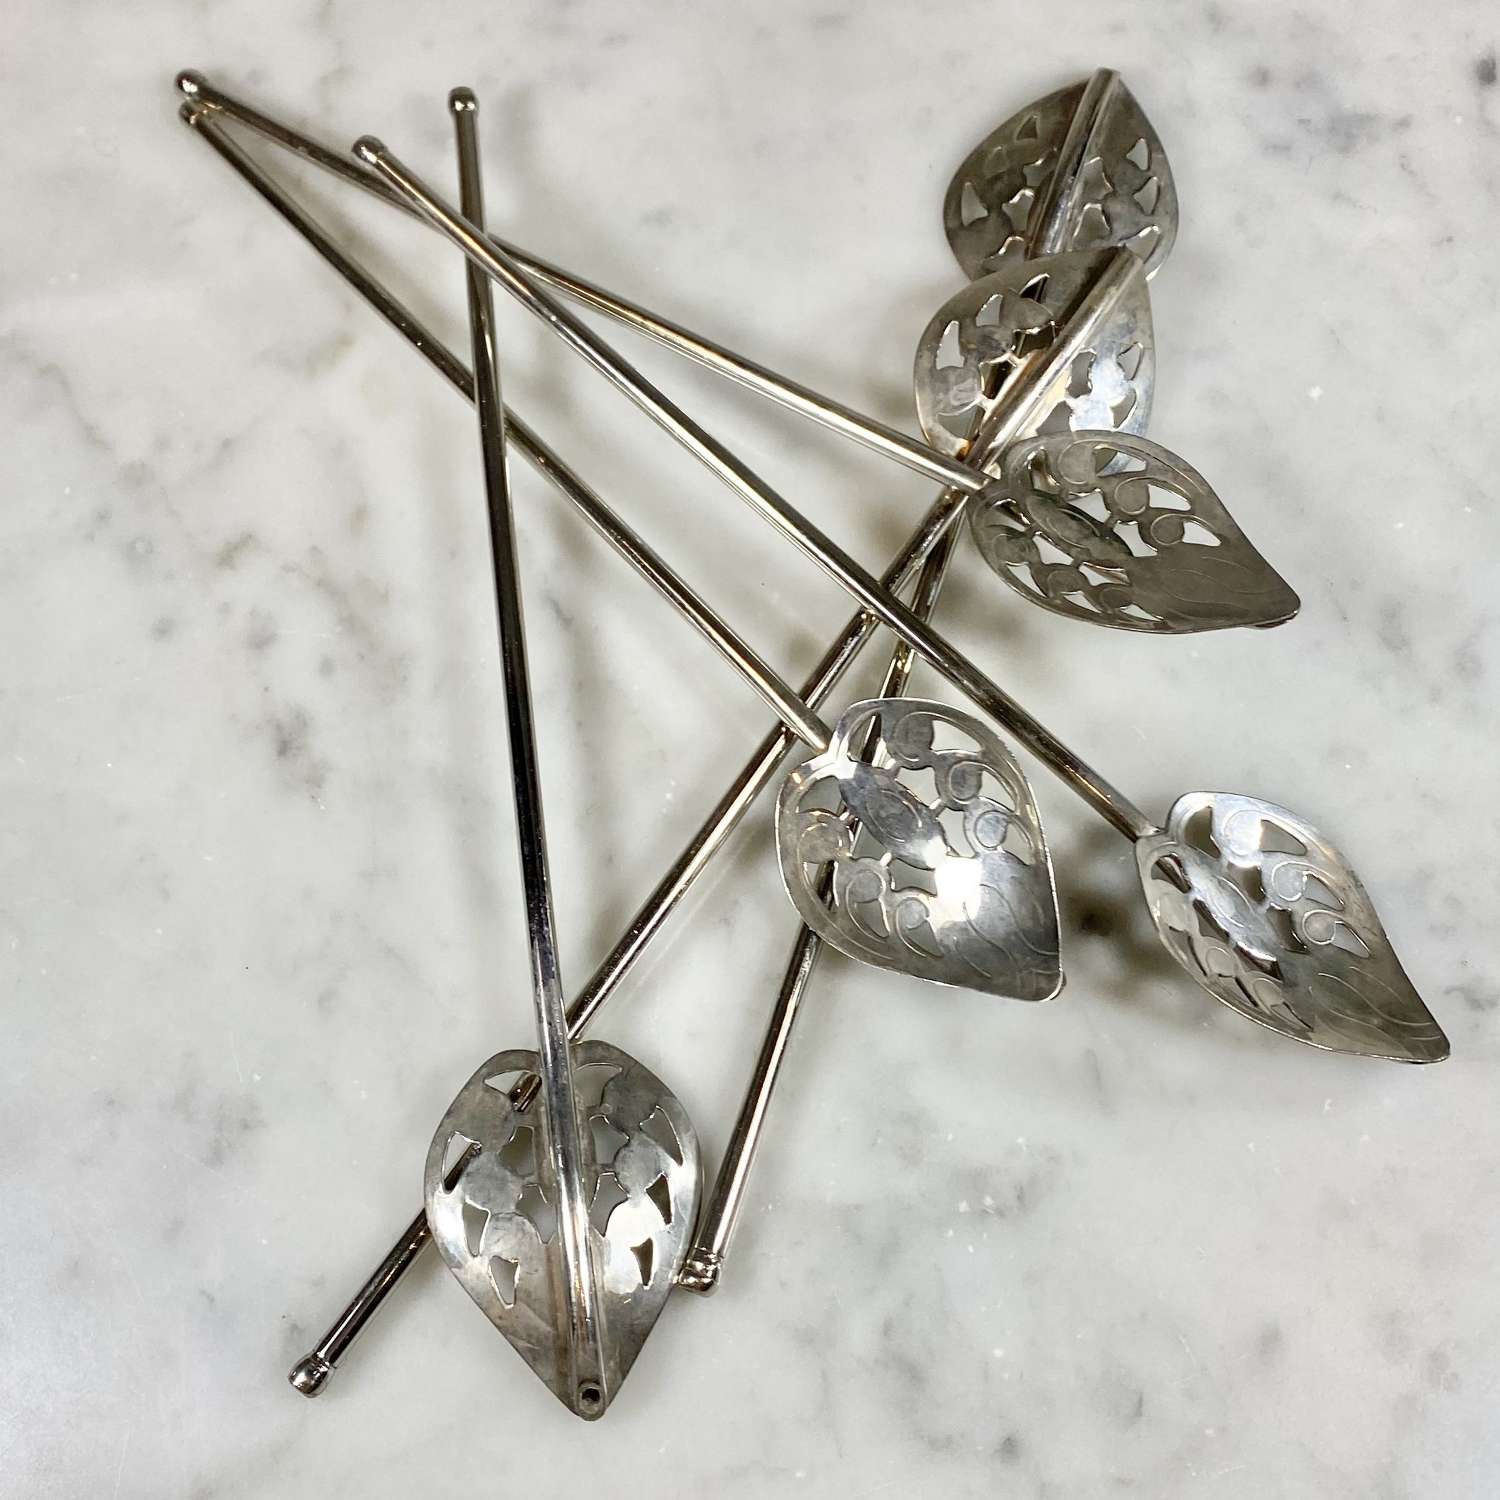 Six vintage cocktail straw mixing spoons